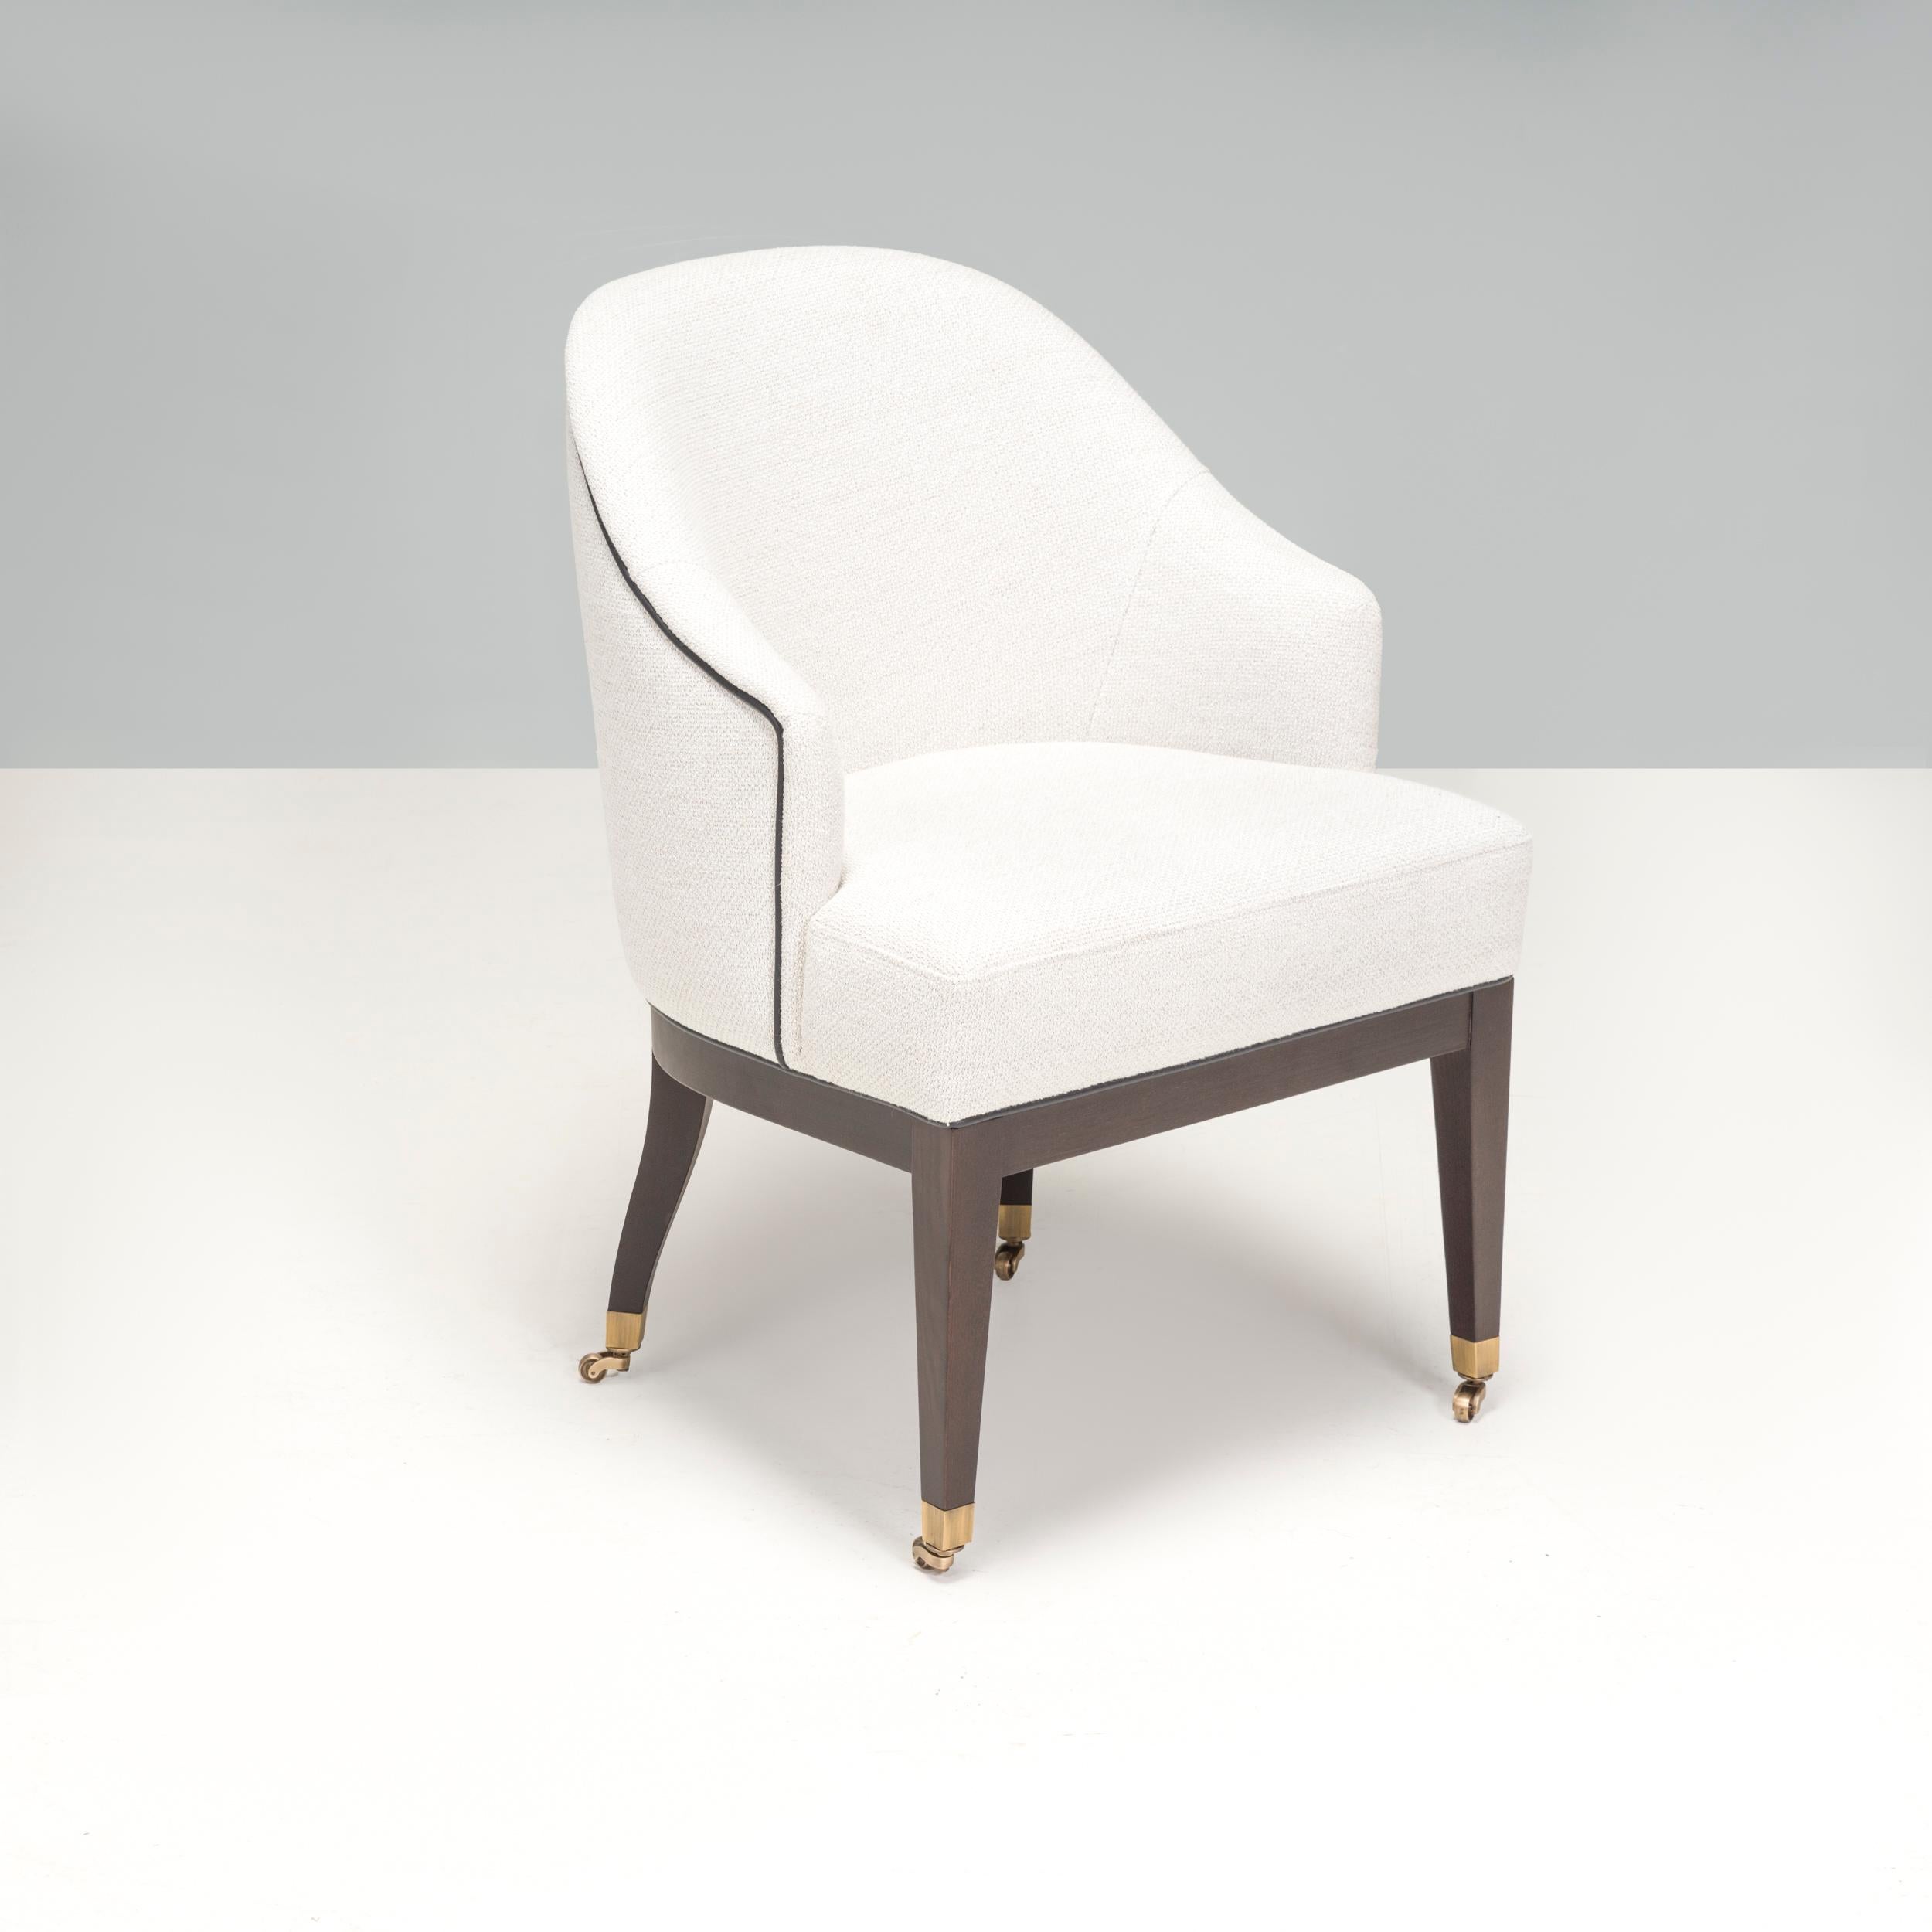 This traditional upholstered office chair with piping has an impressive design that would elevate any living space or bedroom. Its neutral colour palette means it would harmonise well with a range of interior aesthetics. The back of the chair curves